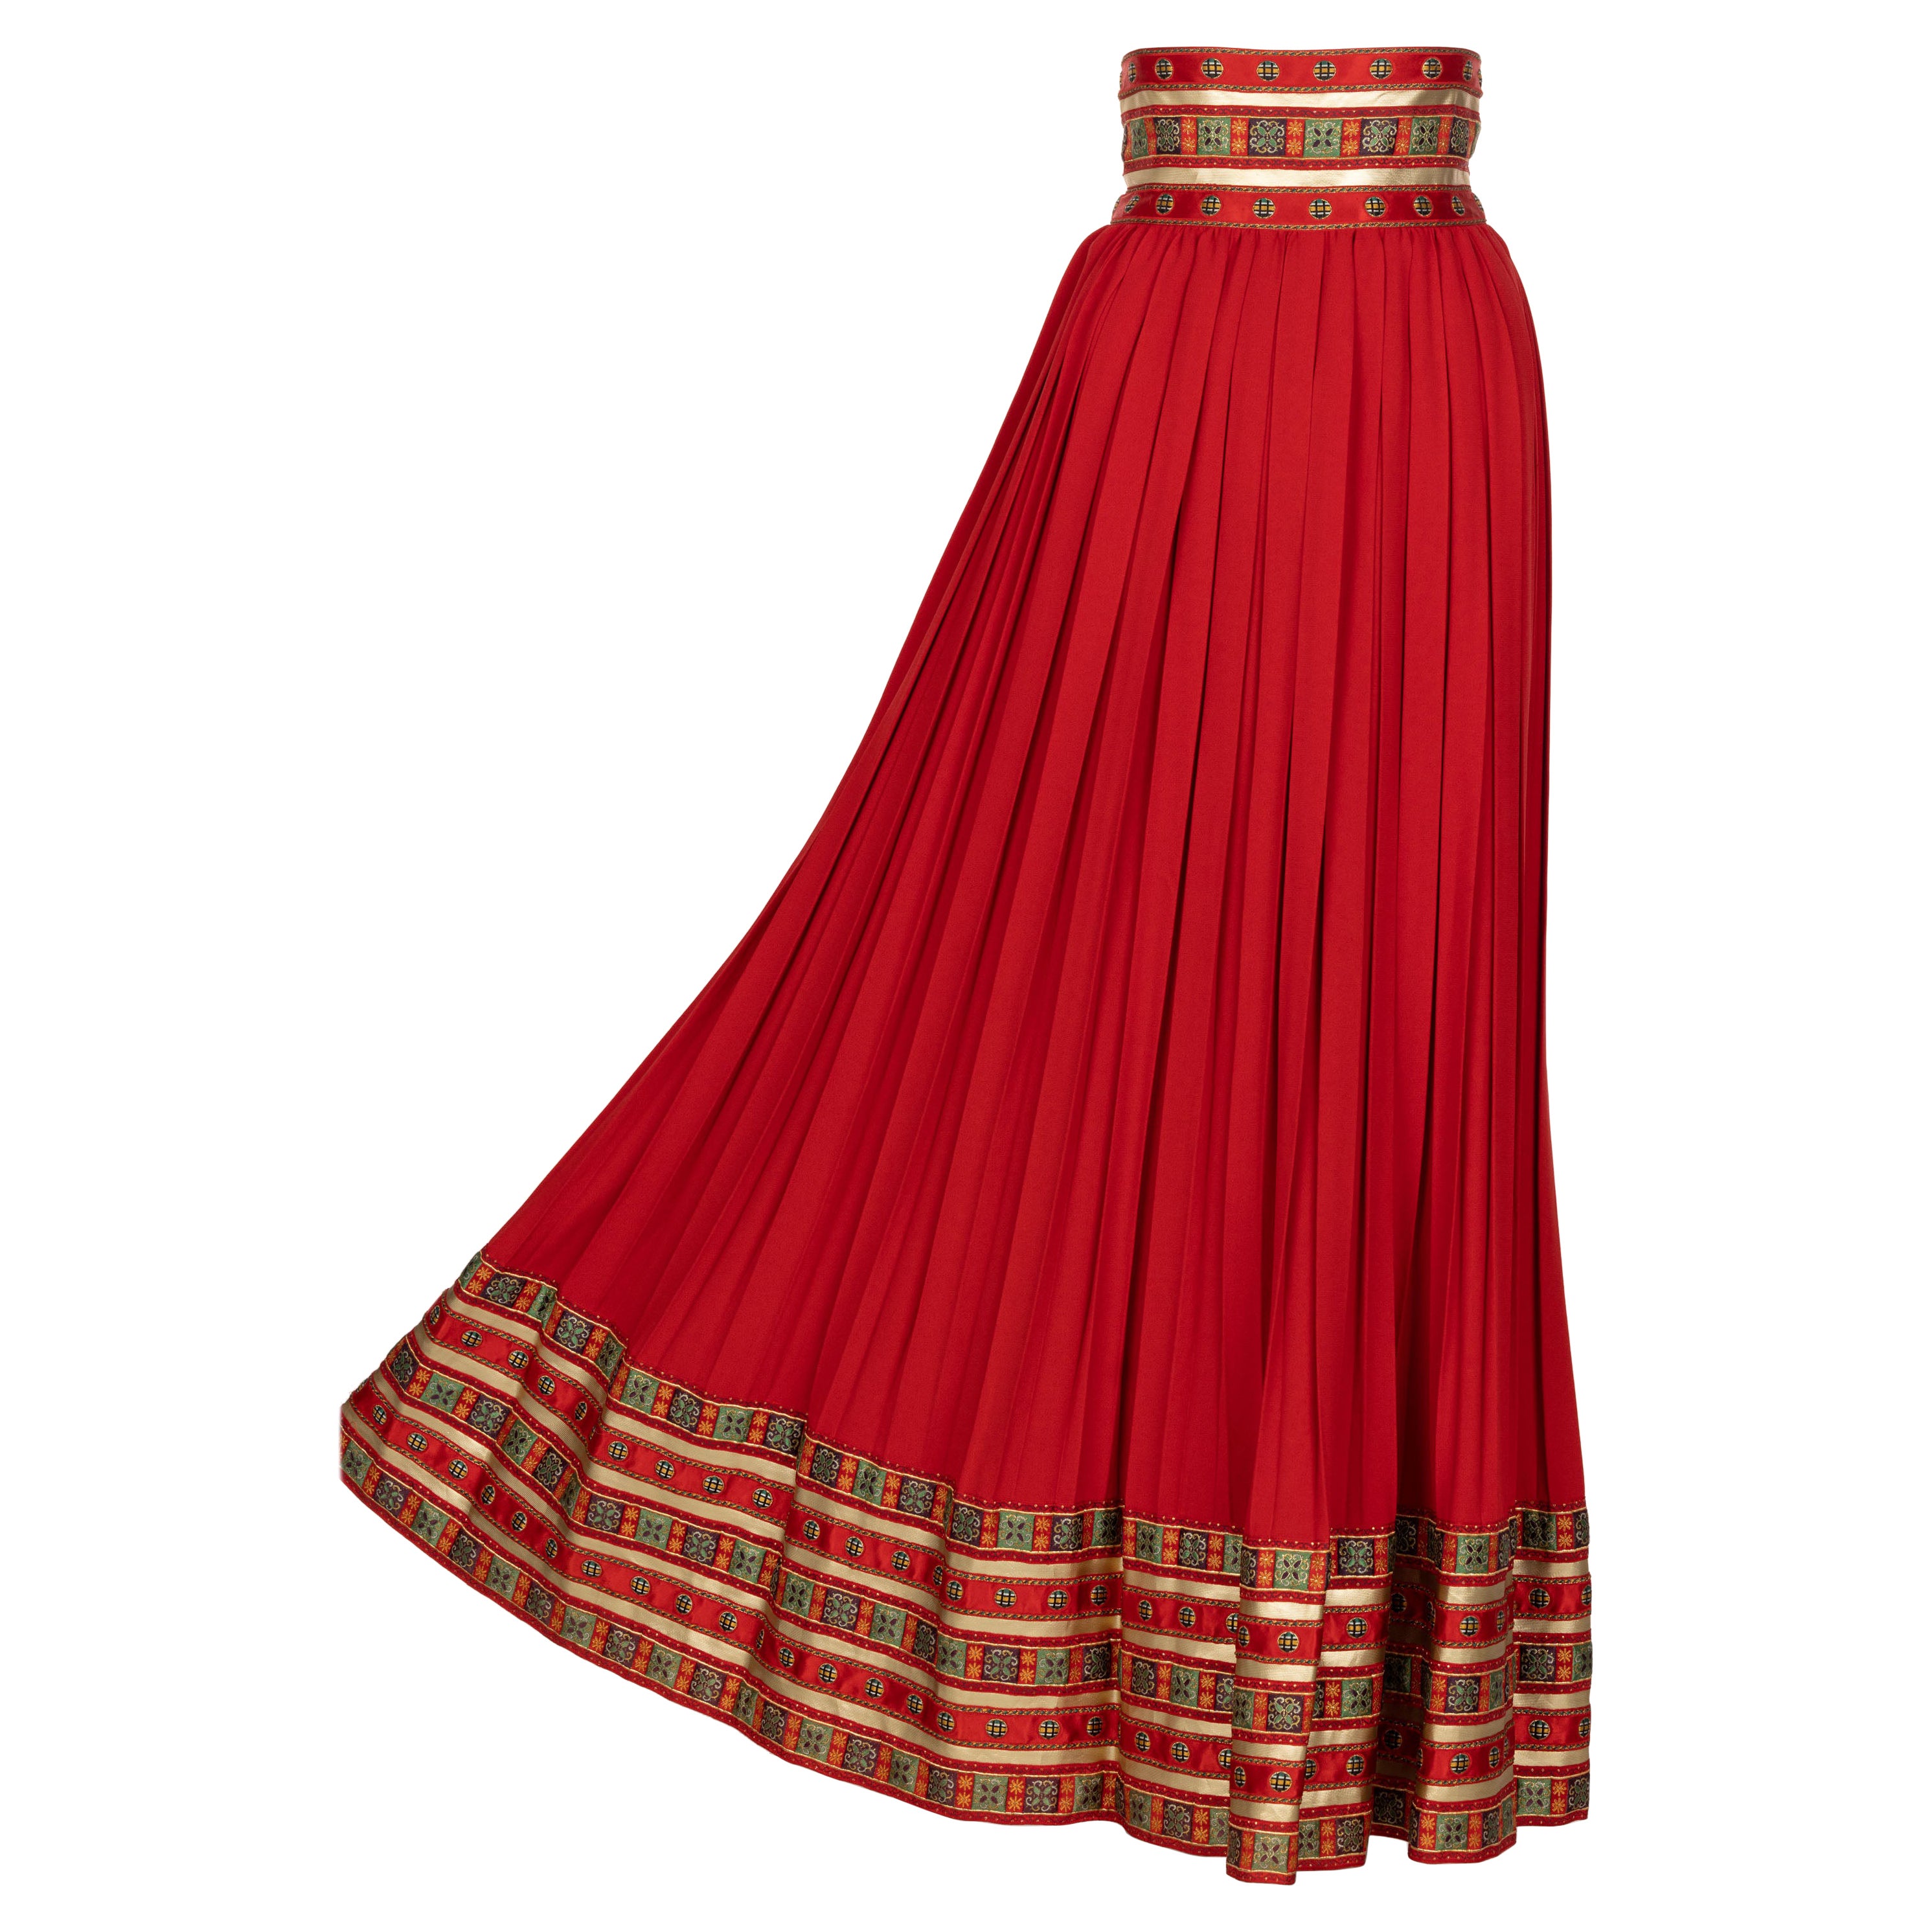 Lanvin Jules-François Crahay Demi Couture Red Pleated Brocade Maxi Skirt 1970s For Sale